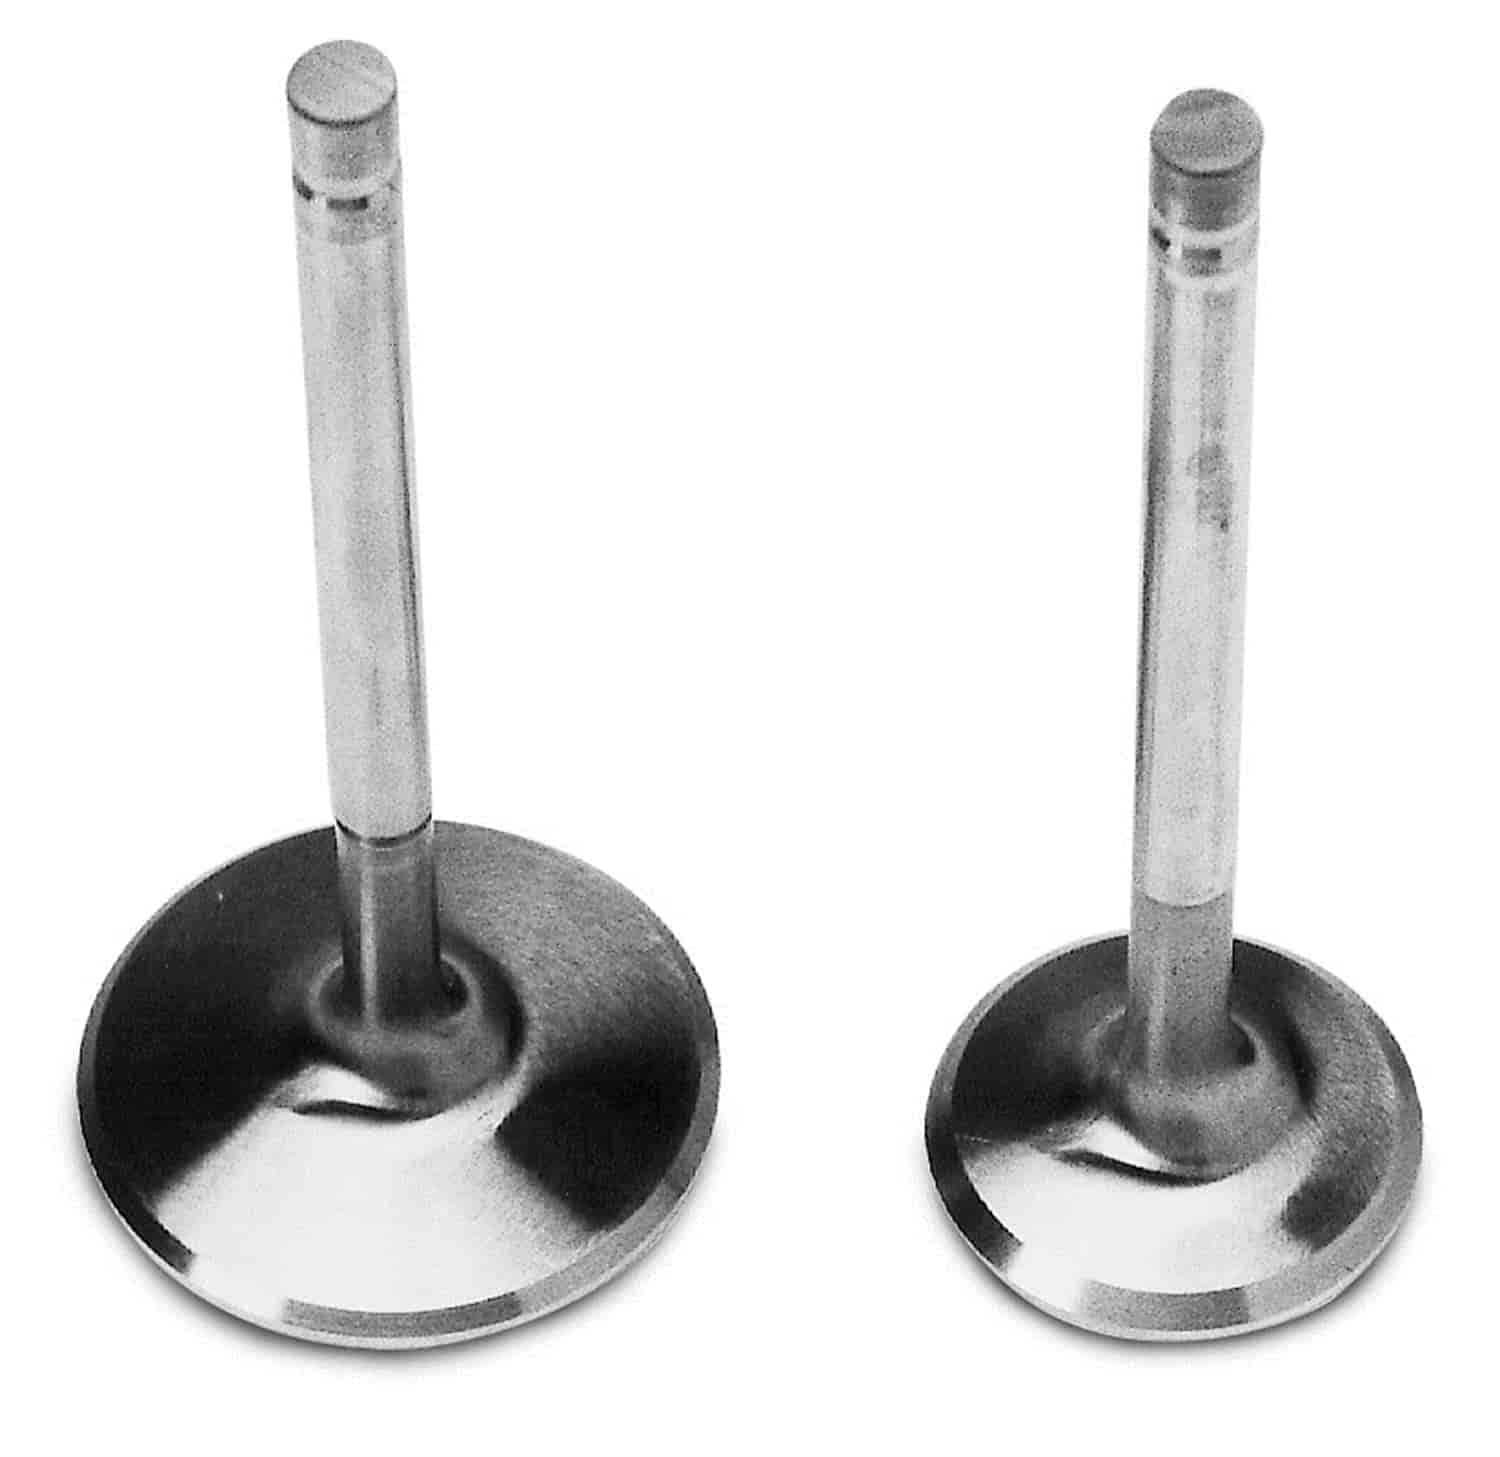 Intake Valve Set 2.02" for Small Block Ford Performer Heads, #350-60399